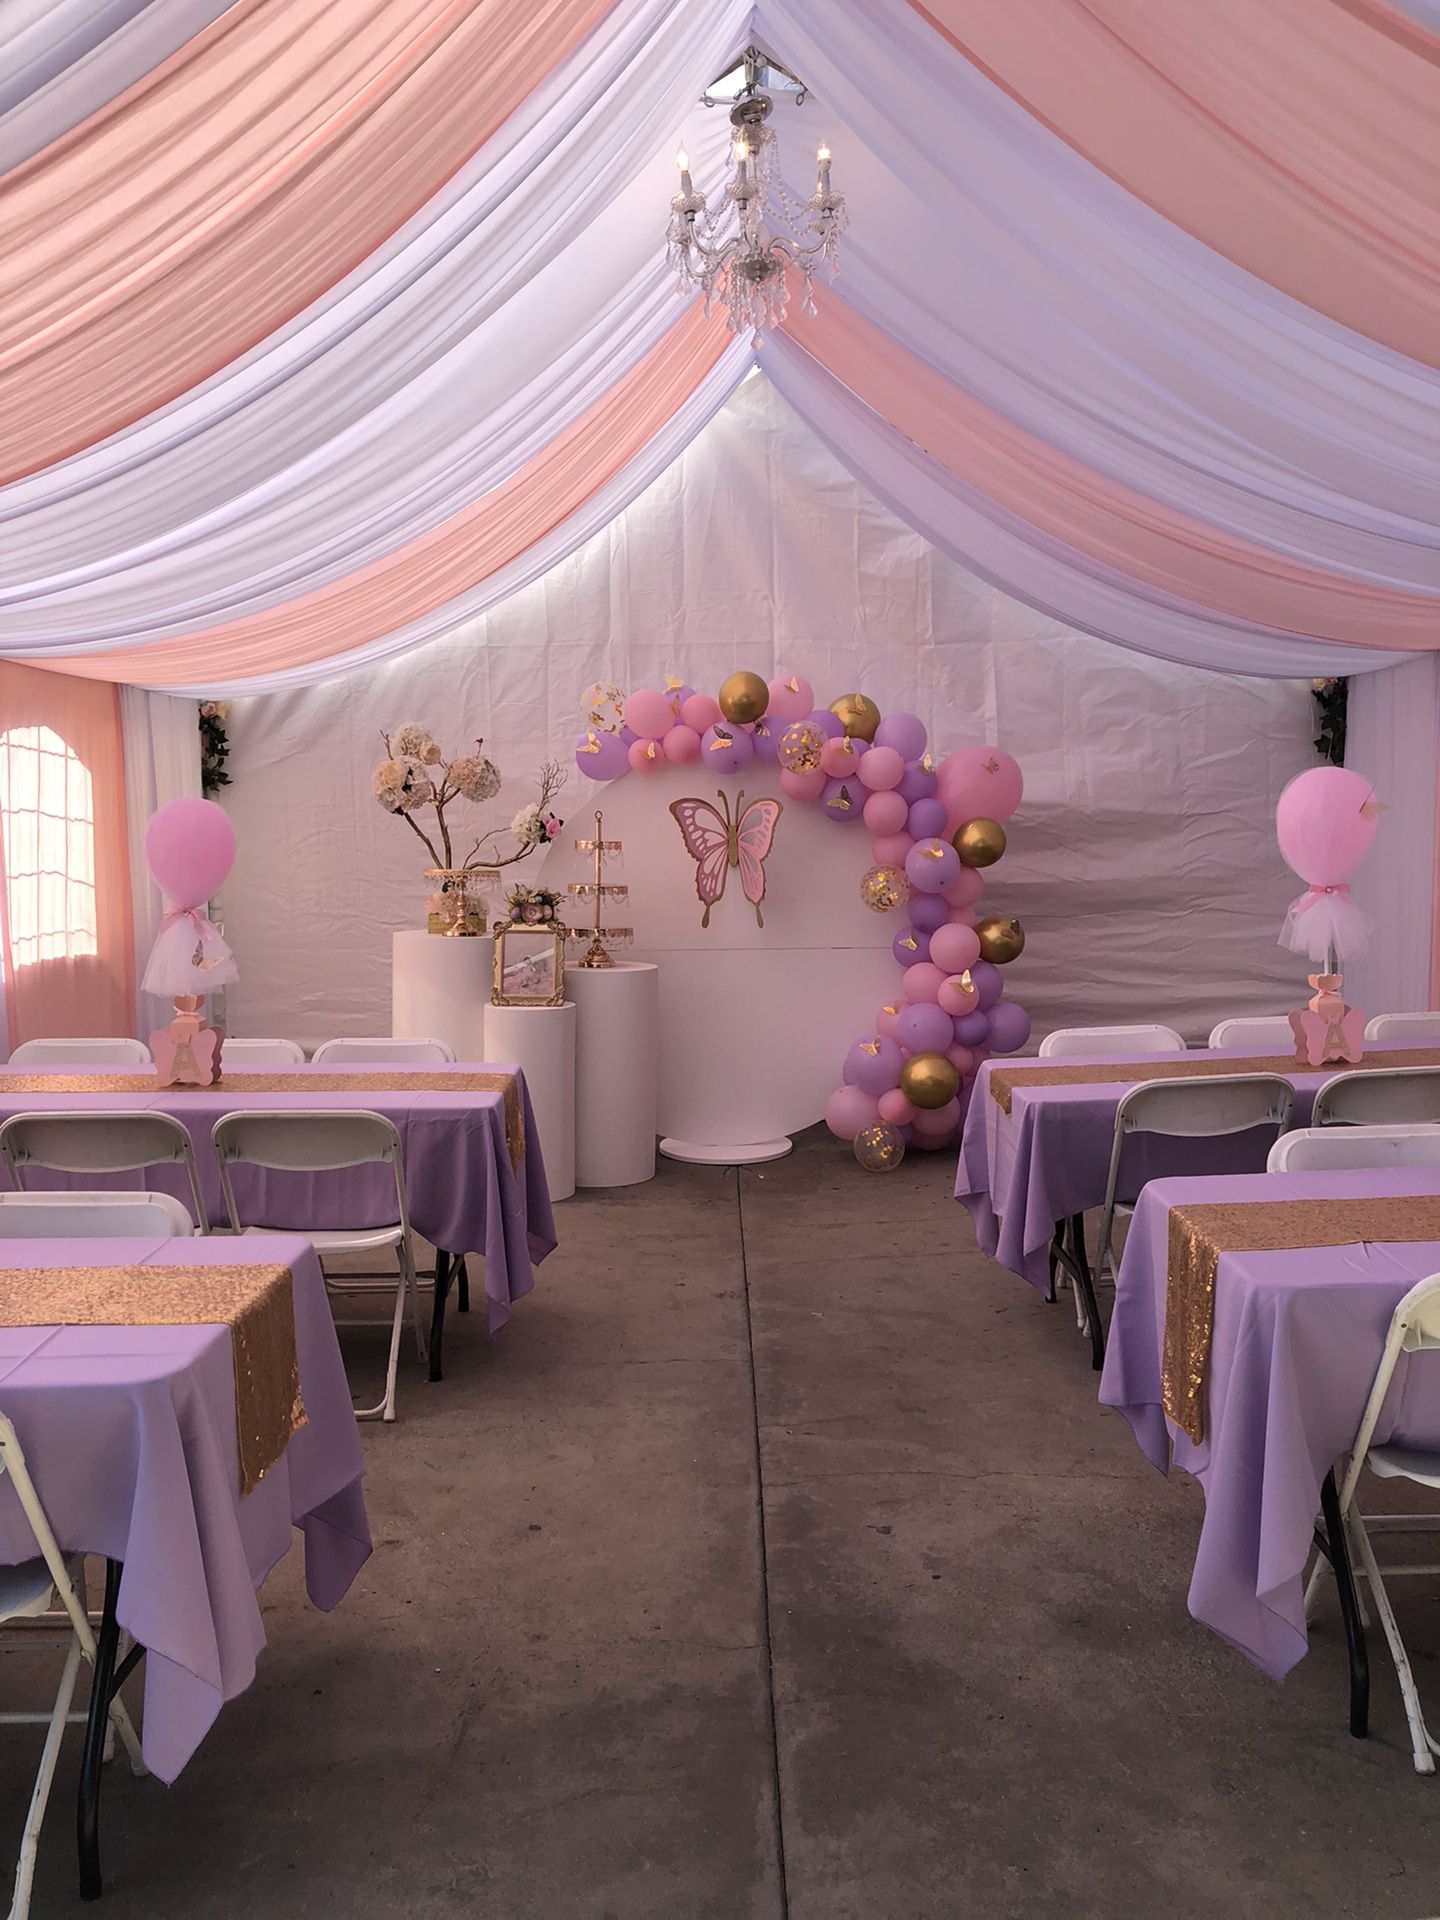 Party setup / party decorations/ butterfly theme/ artificial flowers/ drapes/ backdrop/ balloon garland